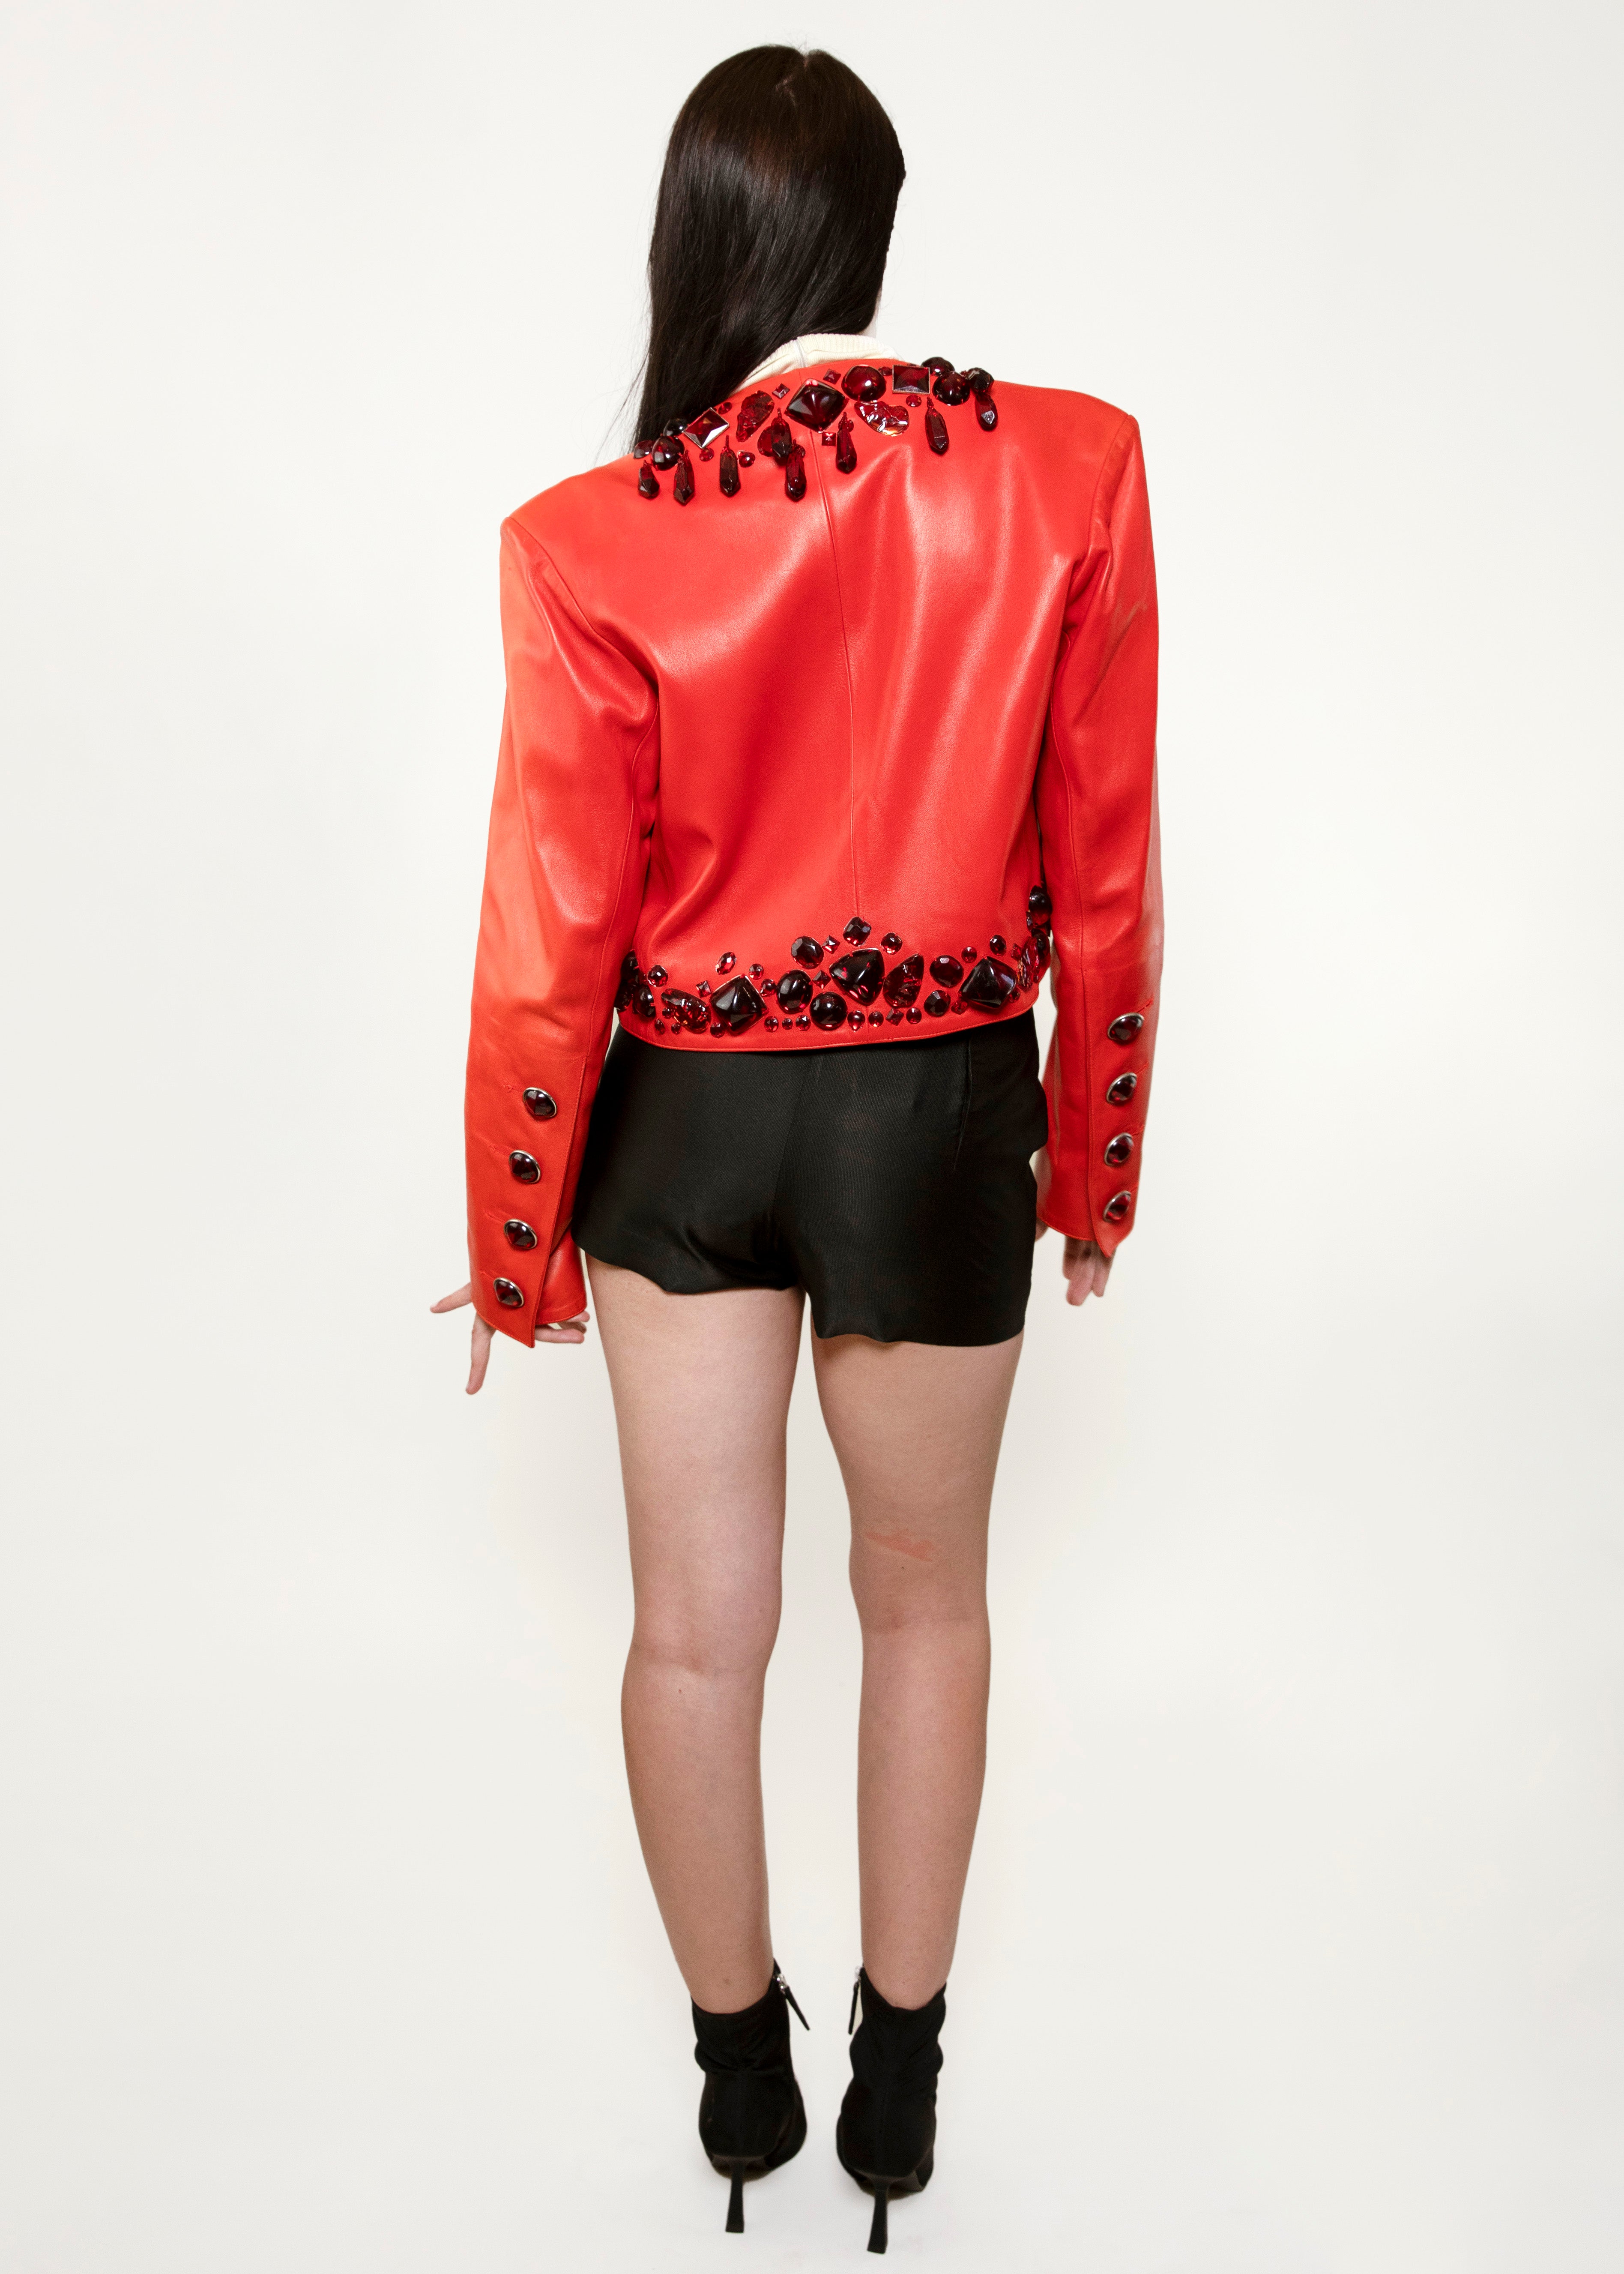 Yves Saint Laurent 1990 Glass Bead Leather Cropped Jacket